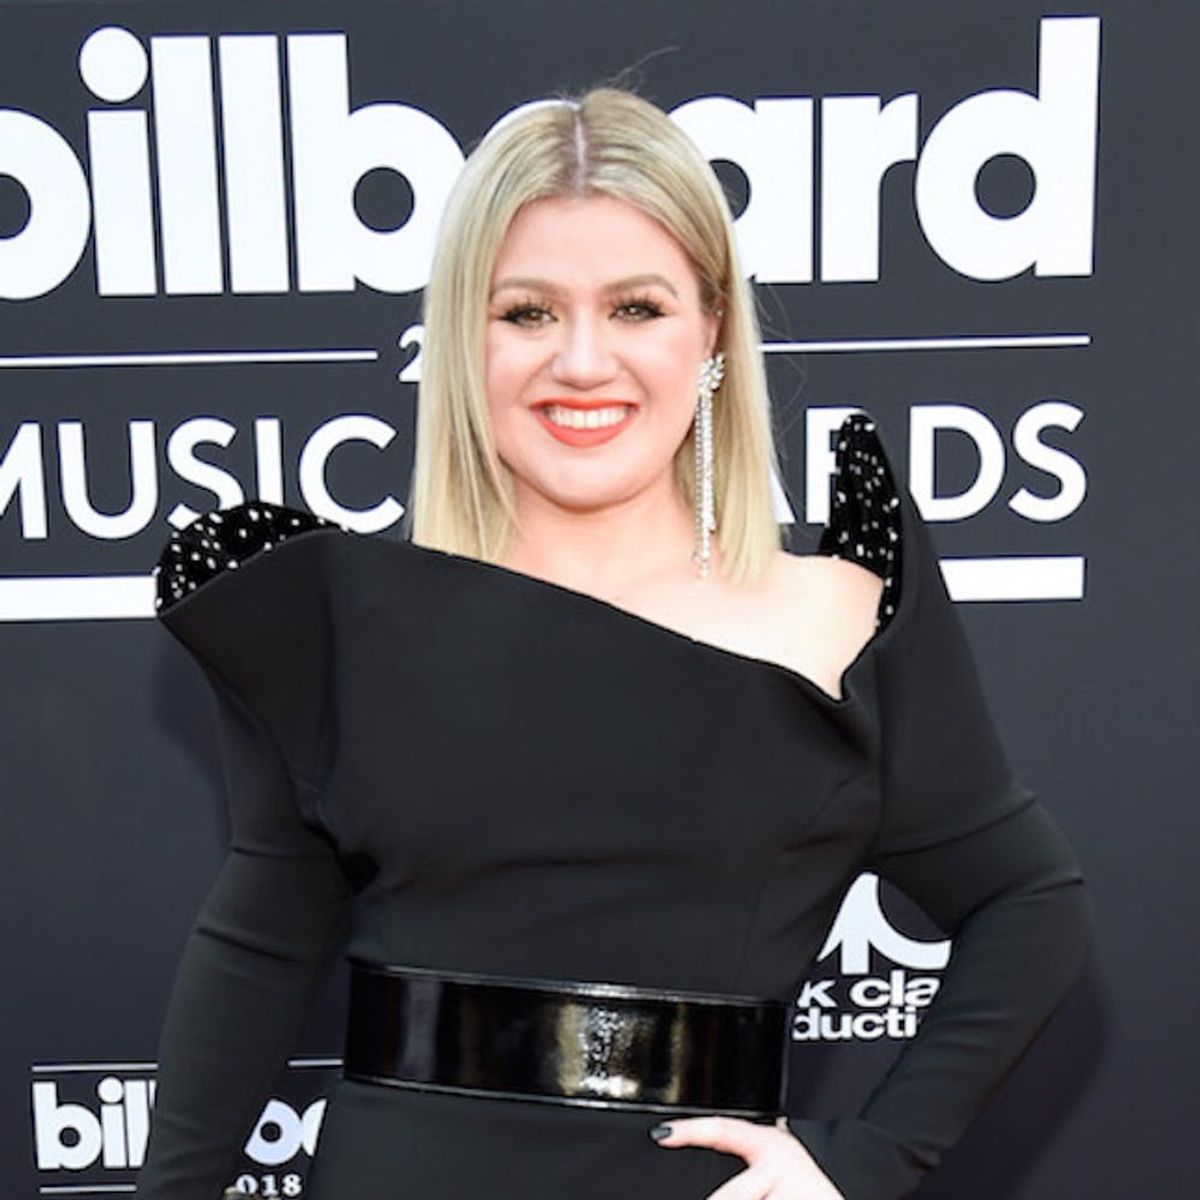 All the Sassiest Looks from the 2018 Billboard Music Awards Red Carpet